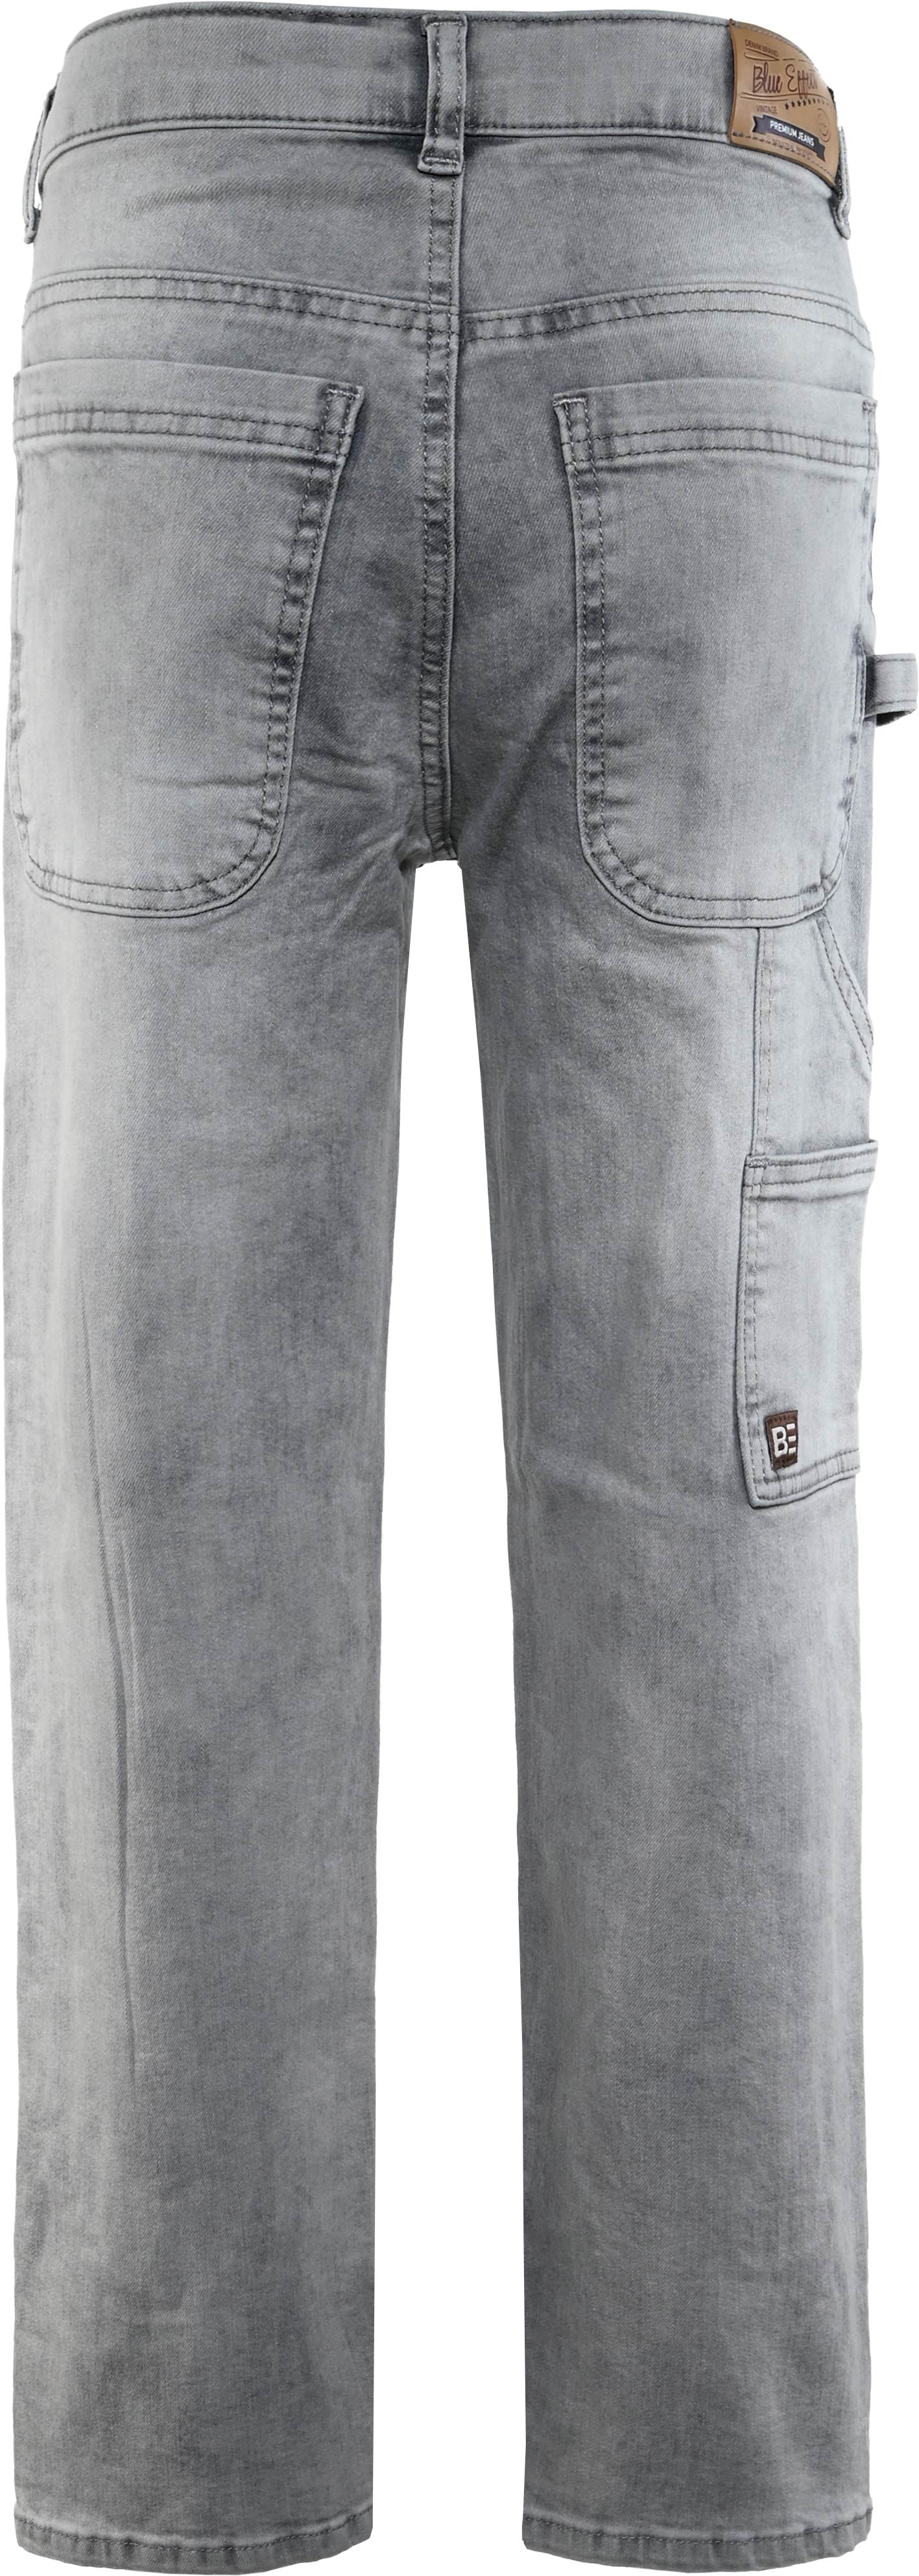 2856-Boys Worker Baggy Jeans available in slim, normal, wide